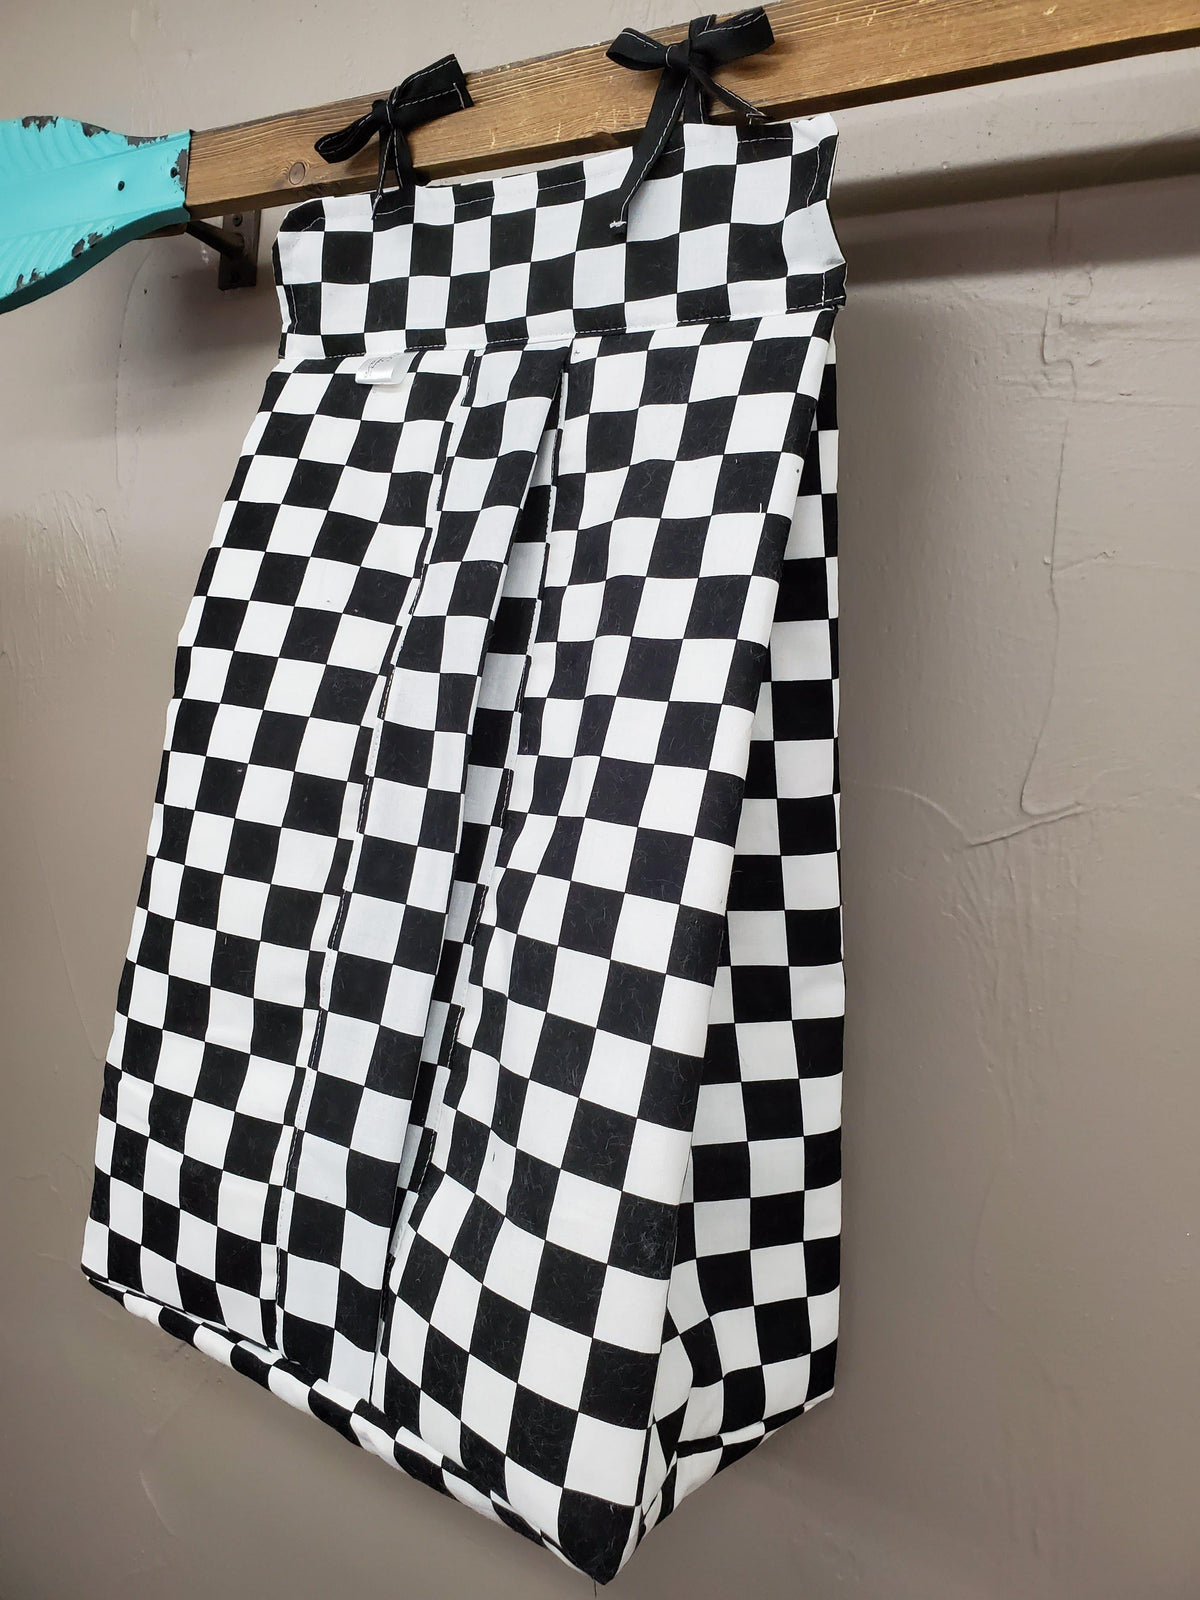 Diaper stacker - Race Flag Check - DBC Baby Bedding Co 